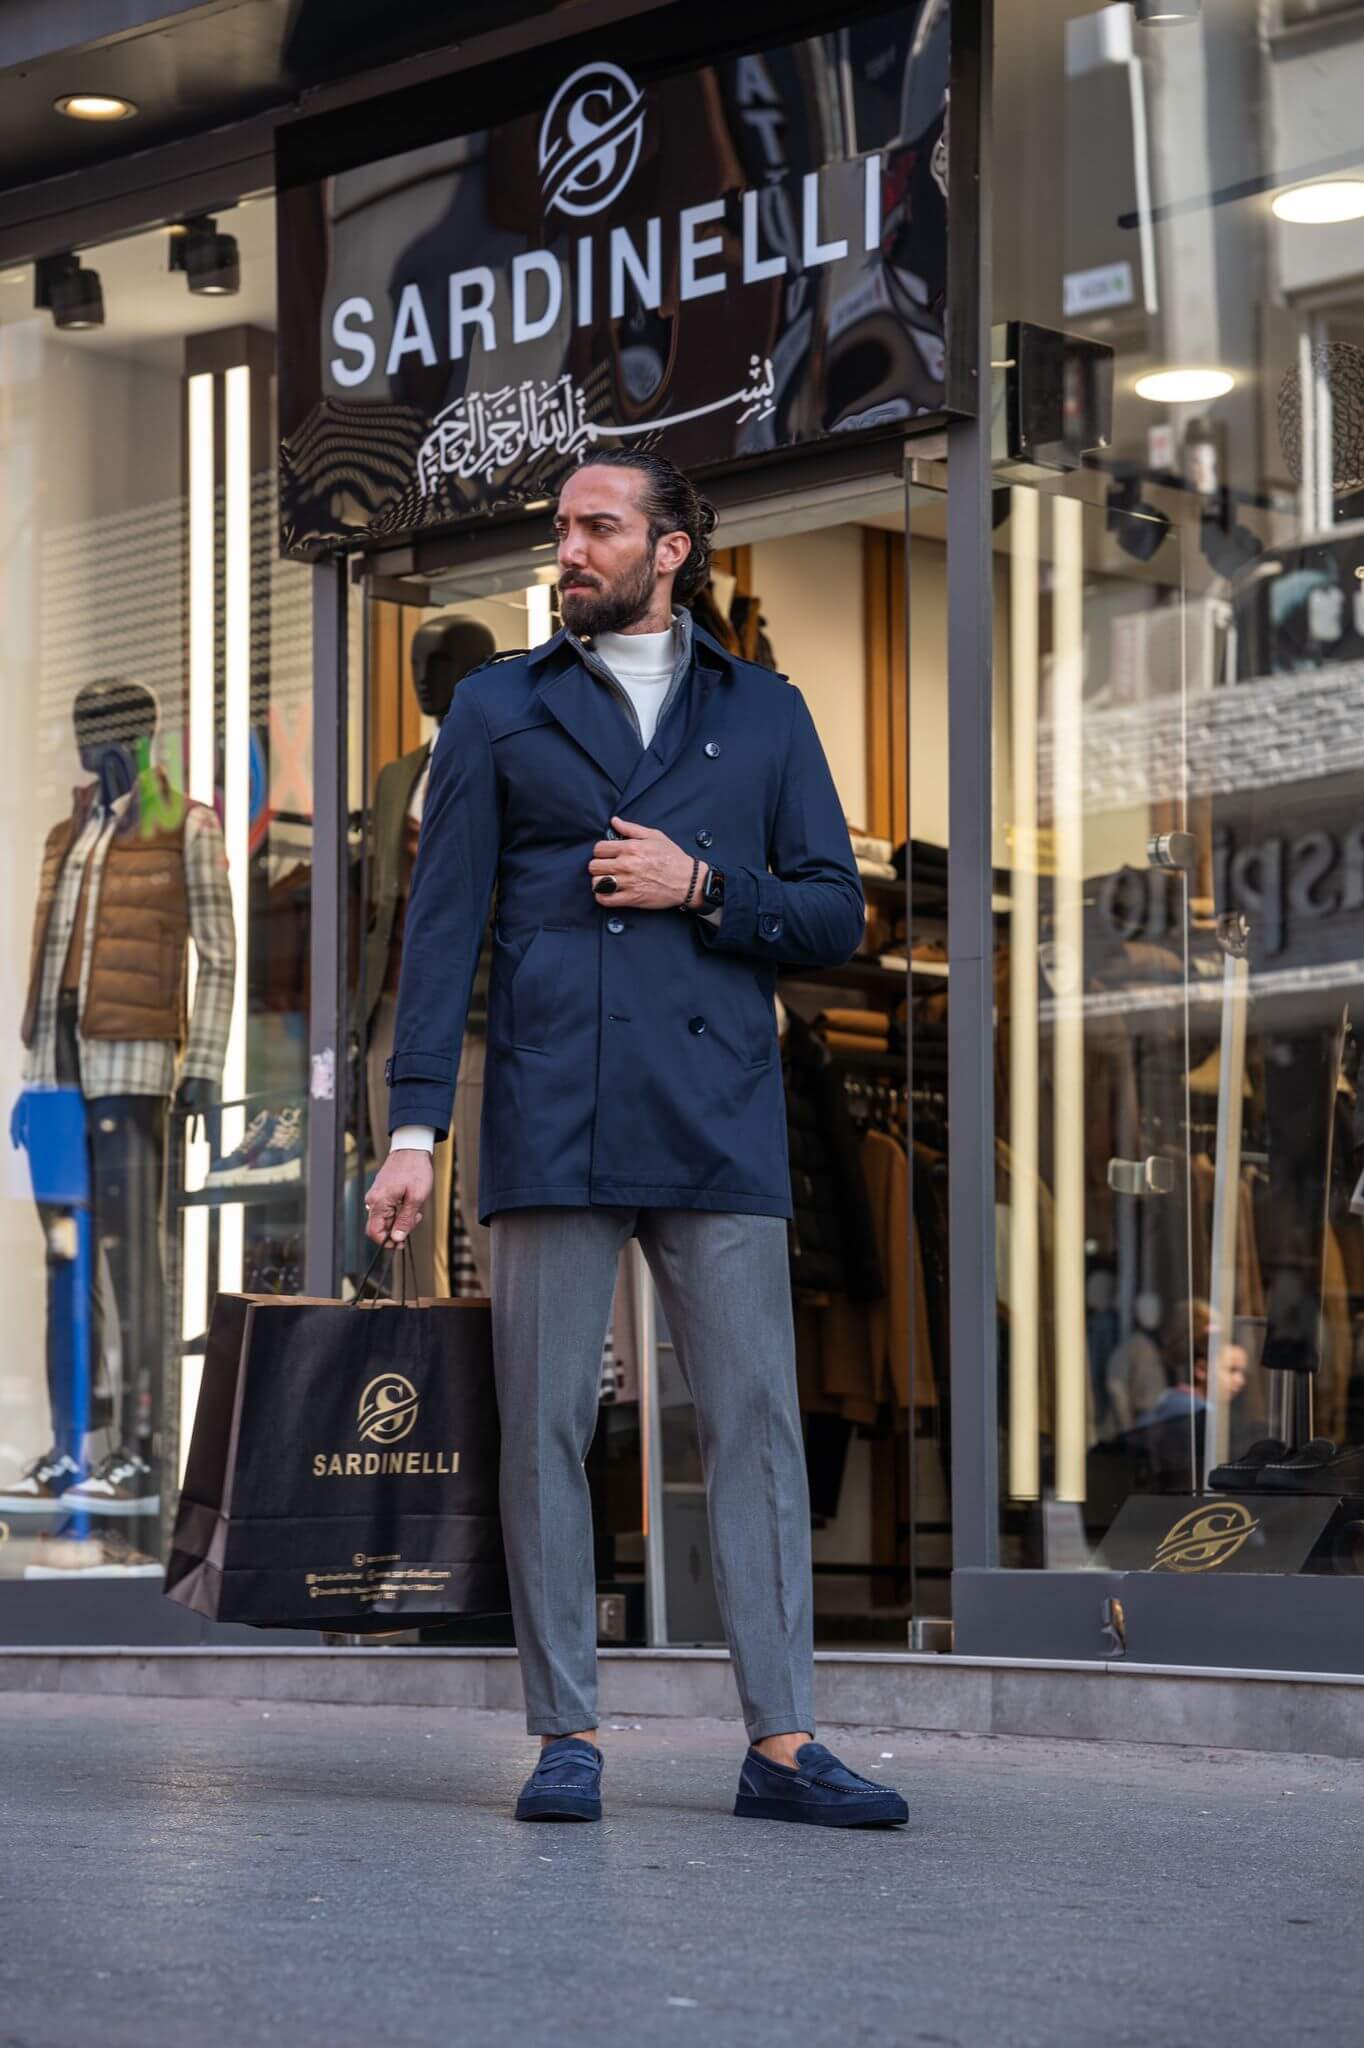 Chic and suave: our male model effortlessly rocks a navy blue trench coat